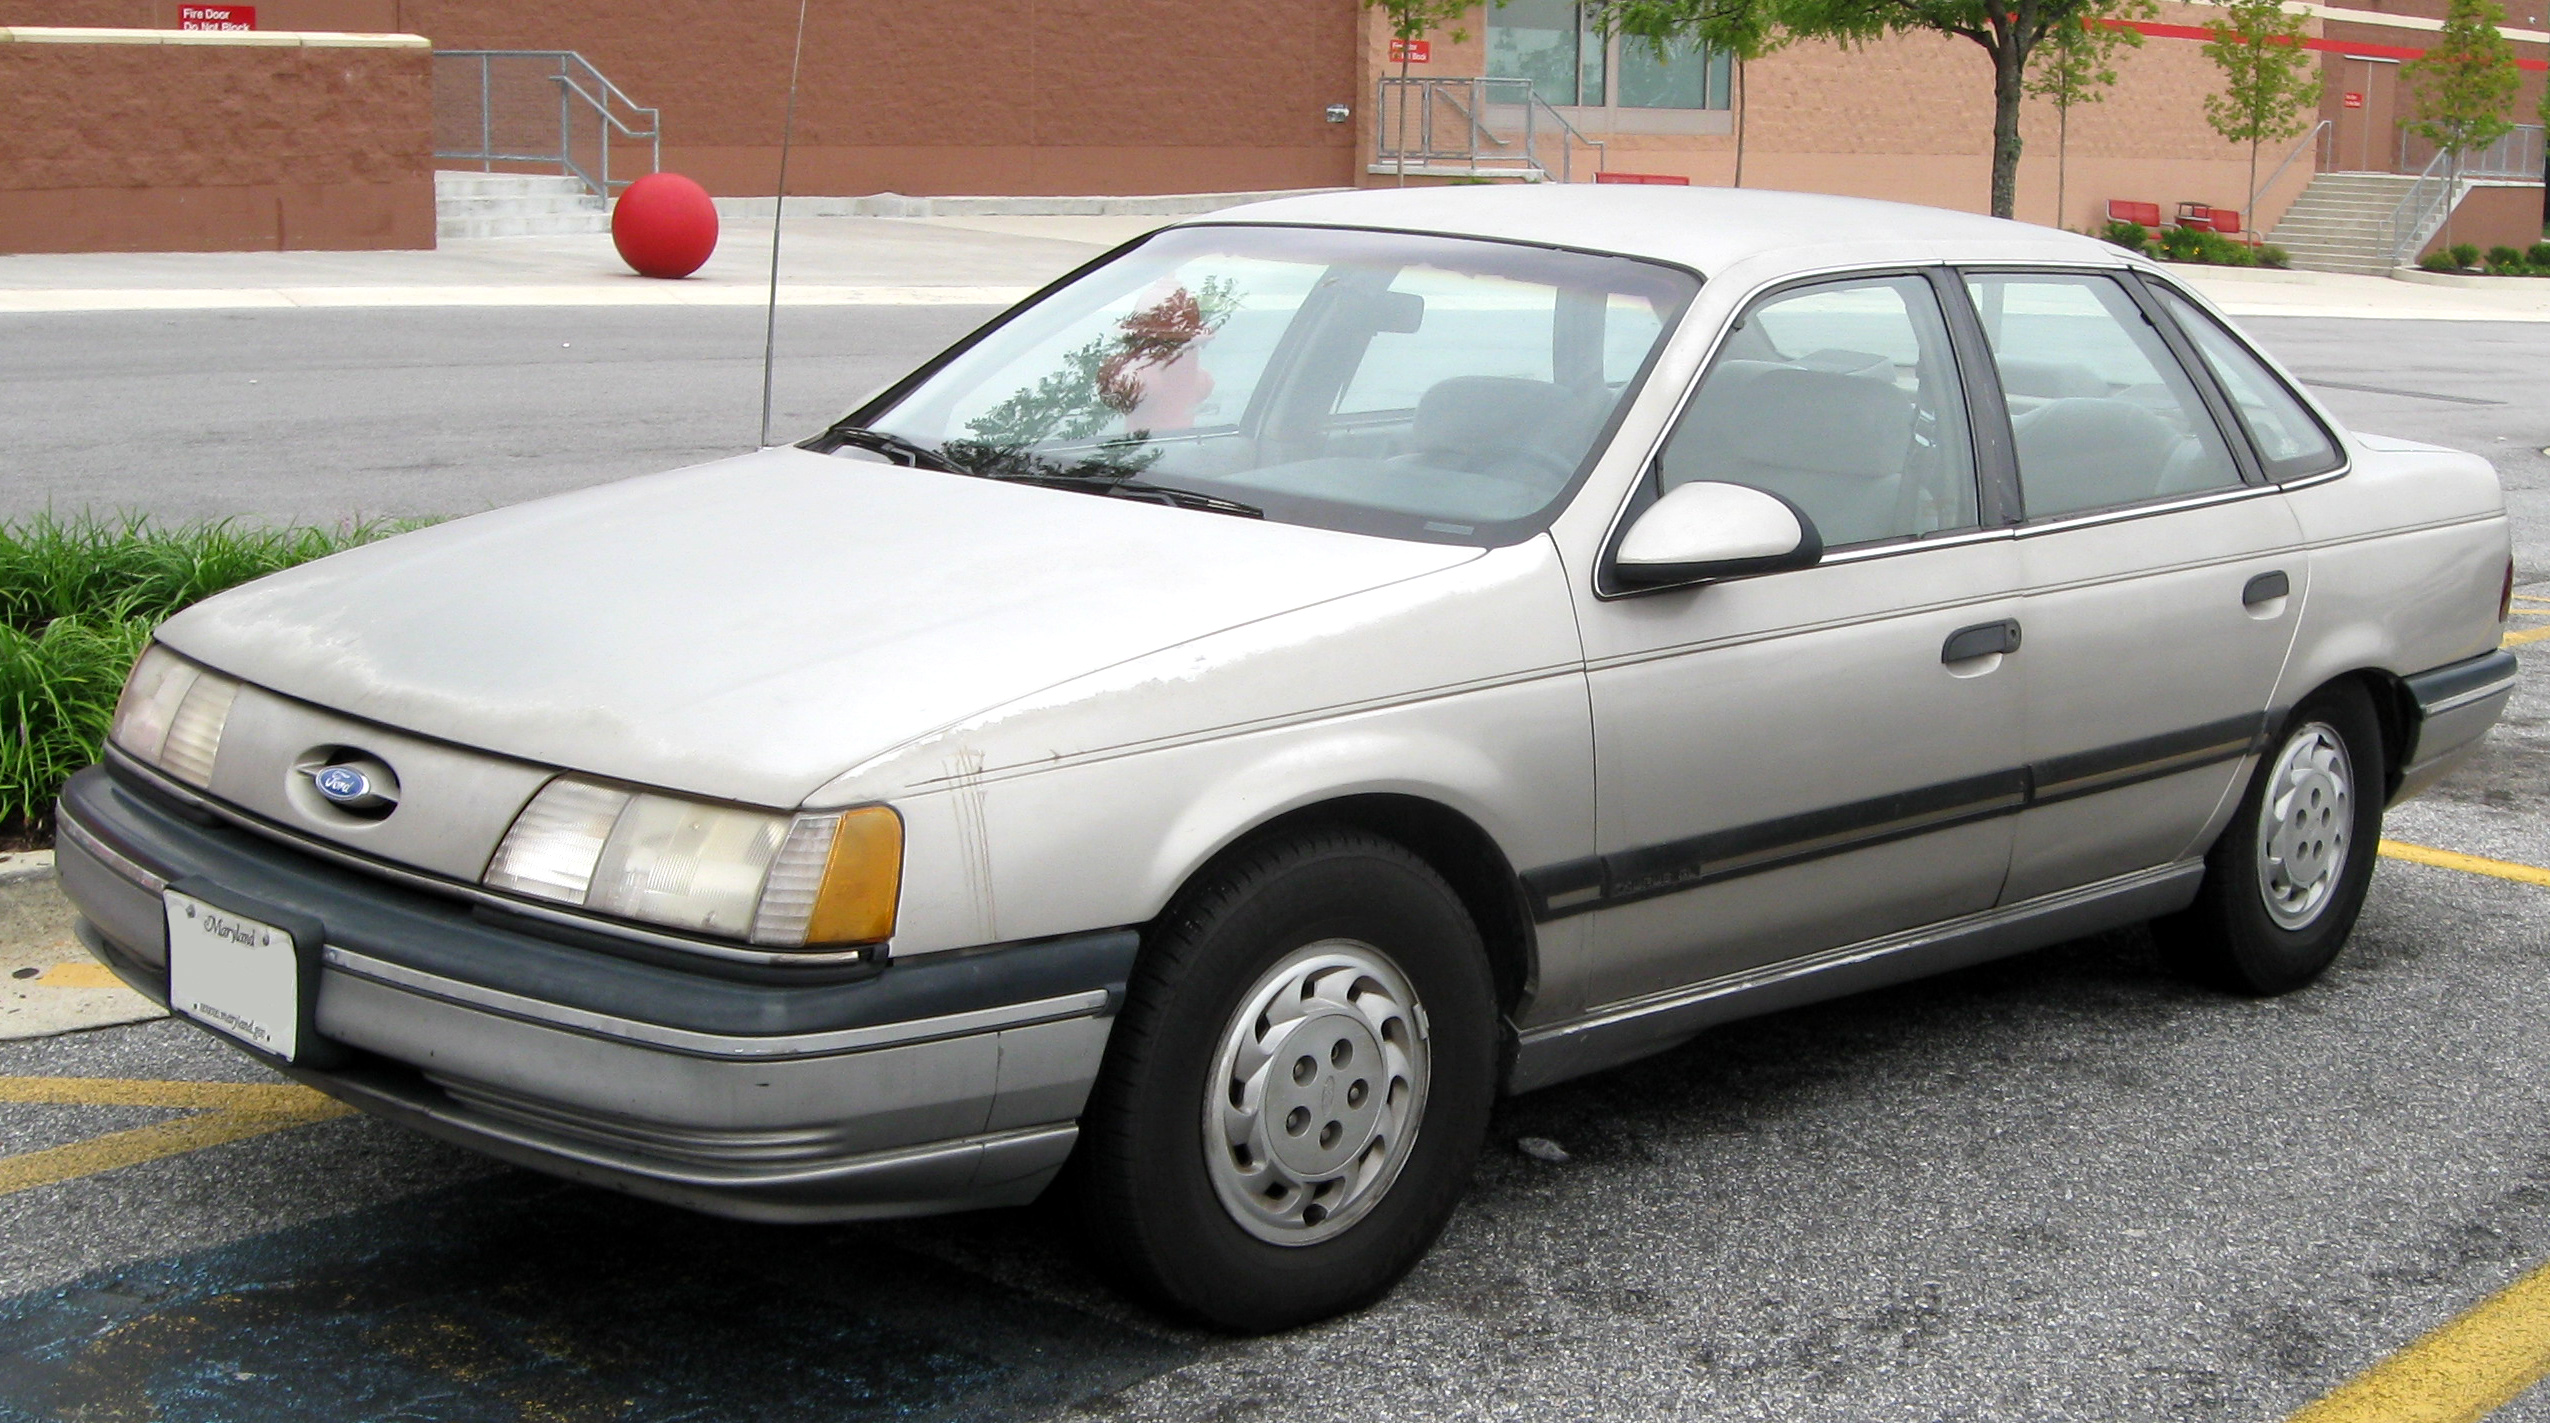 1990 Ford taurus wagon review #10